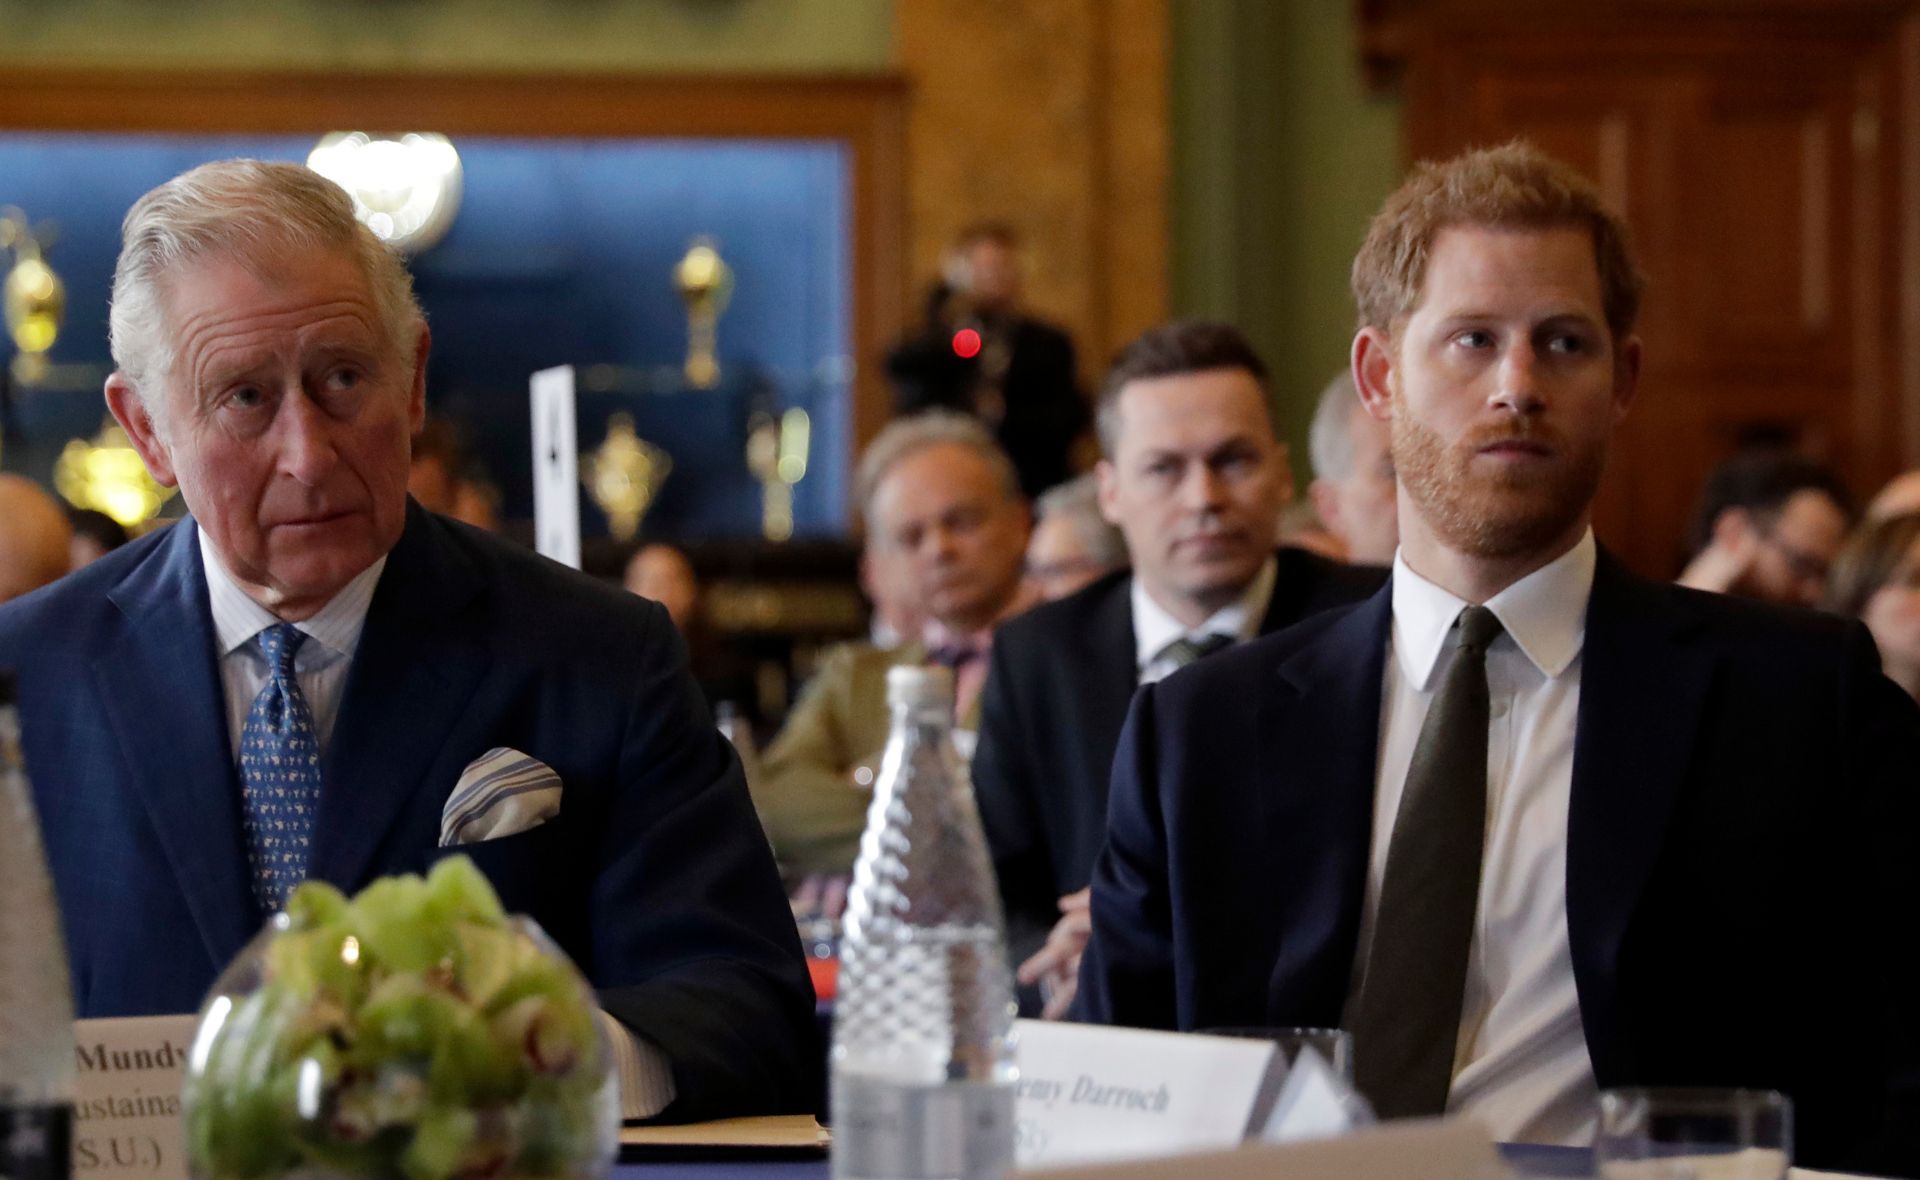 Prince Harry hit with a major royal snub from King Charles following leak of his memoir ‘Spare’